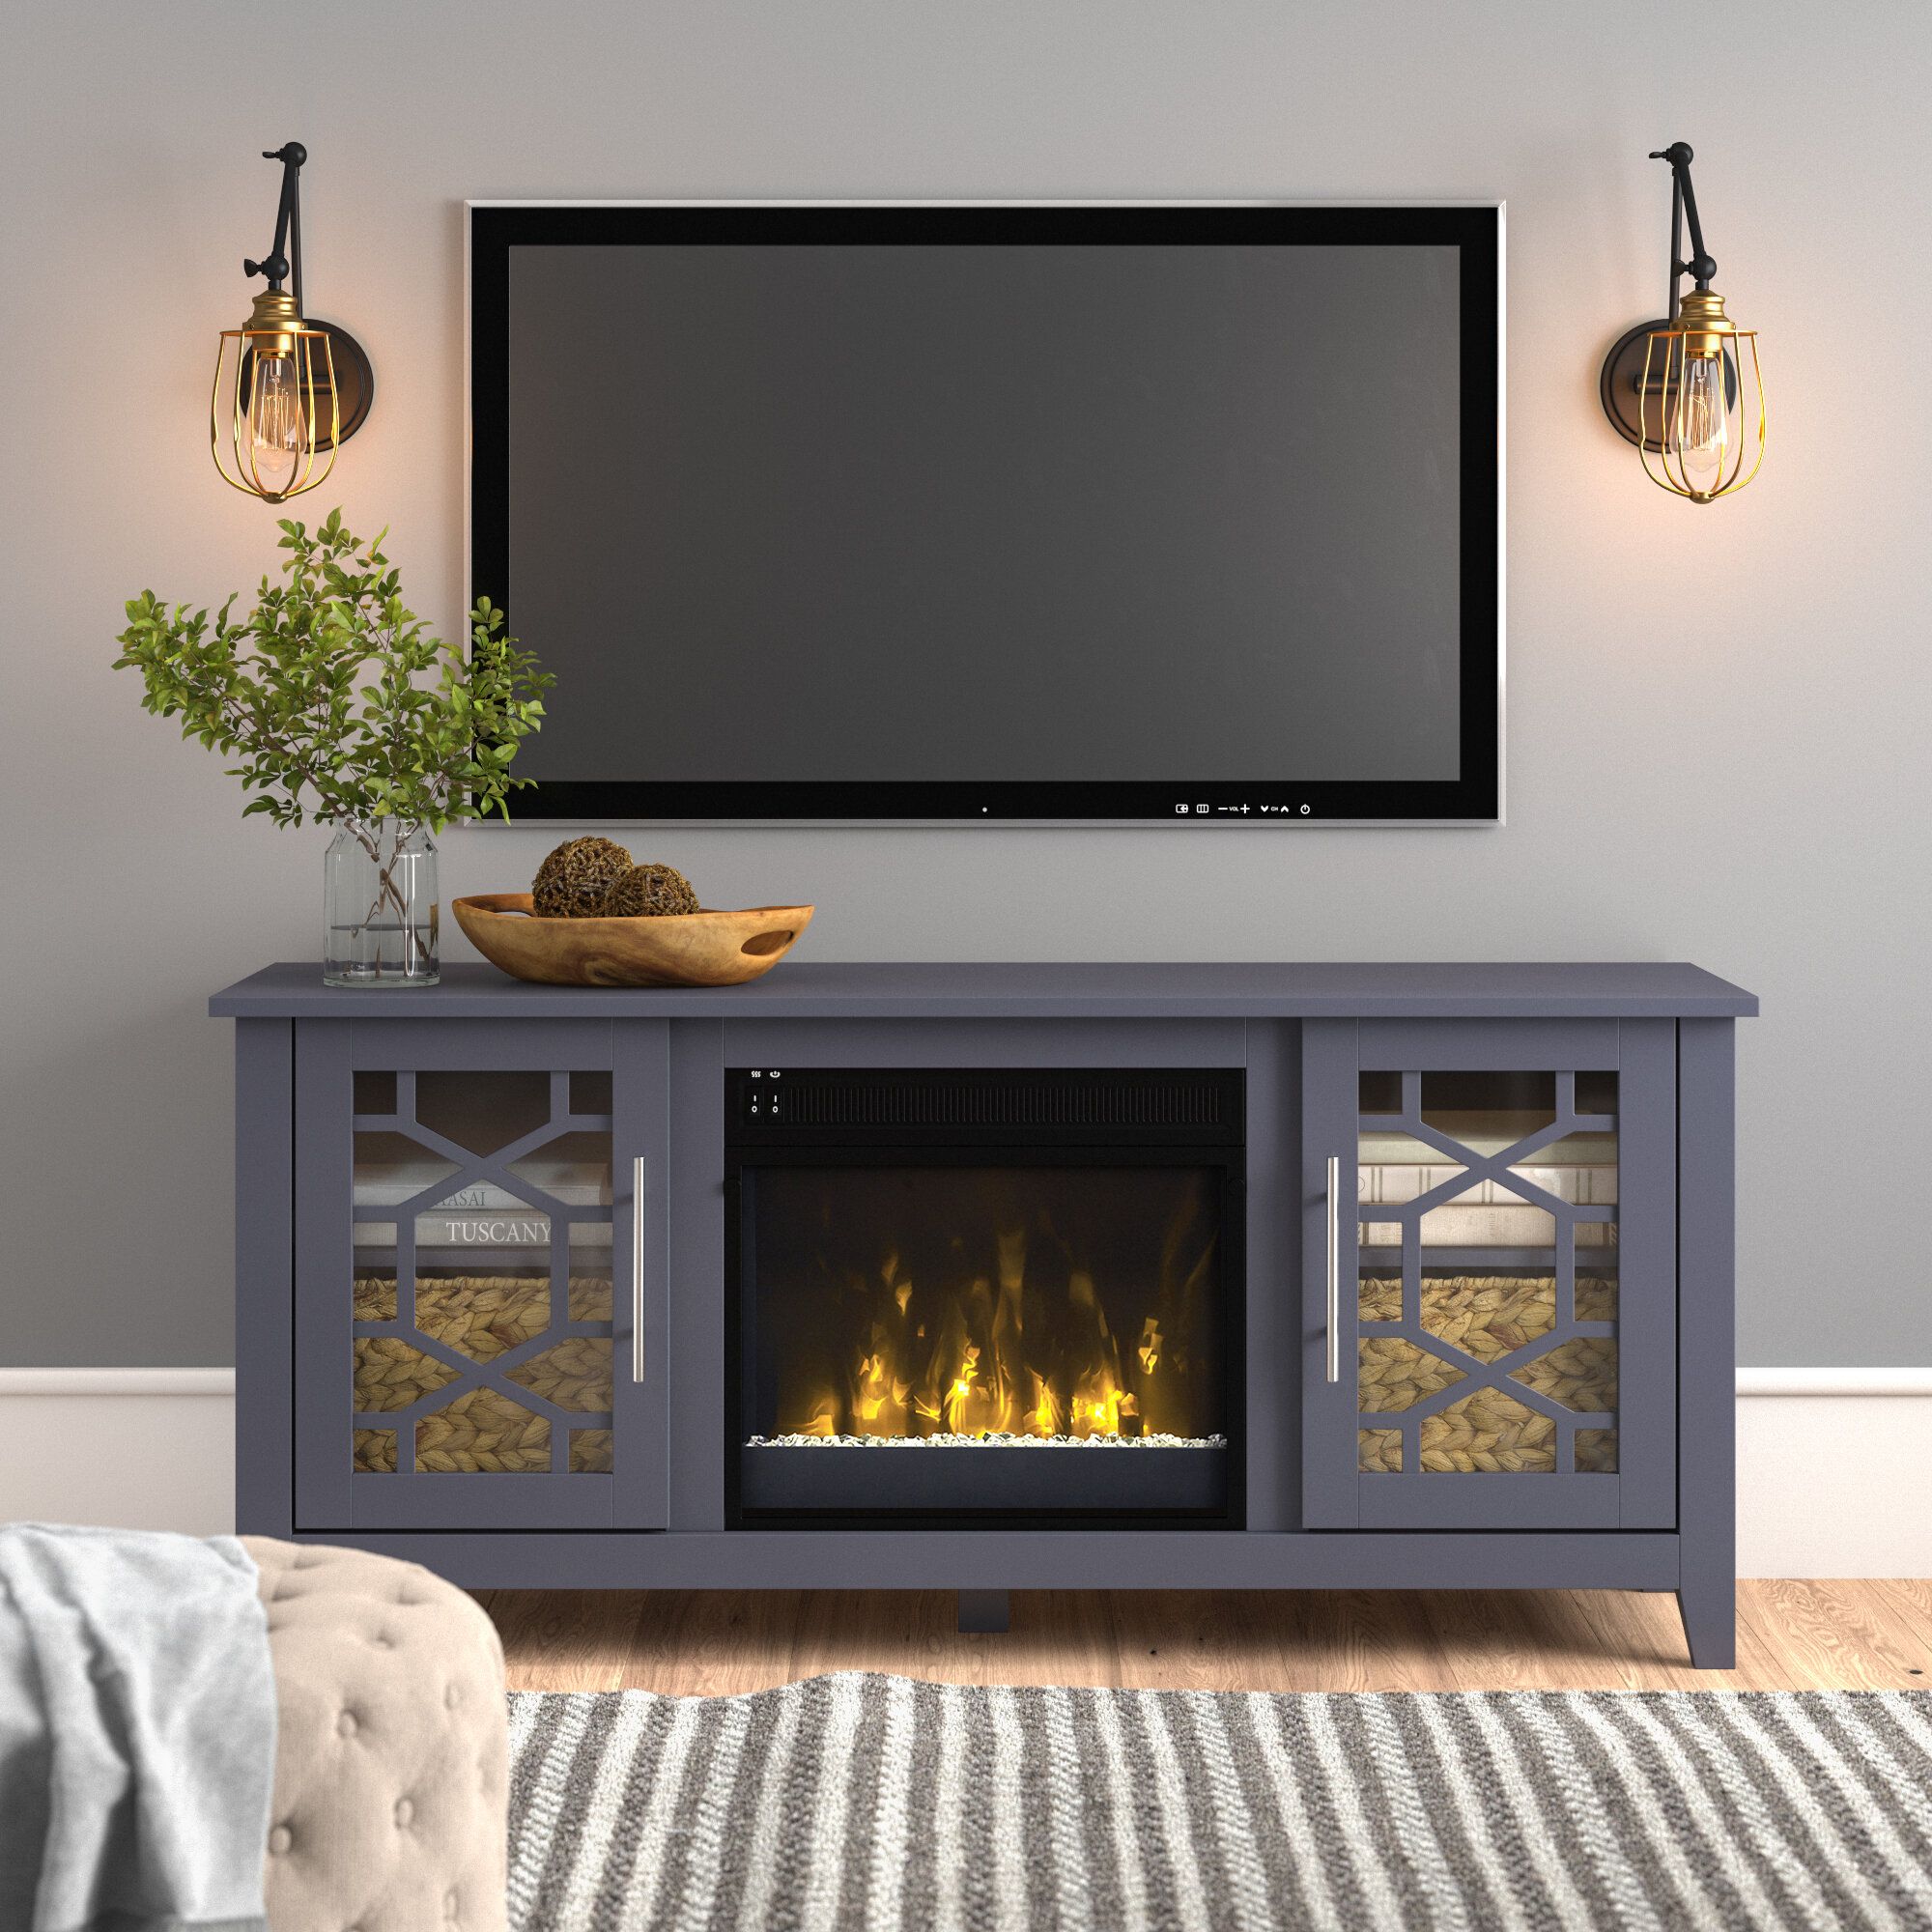 Farmhouse & Rustic Tv Stands | Birch Lane Within Madison Park Rachel Grey Media Credenzas (View 14 of 30)